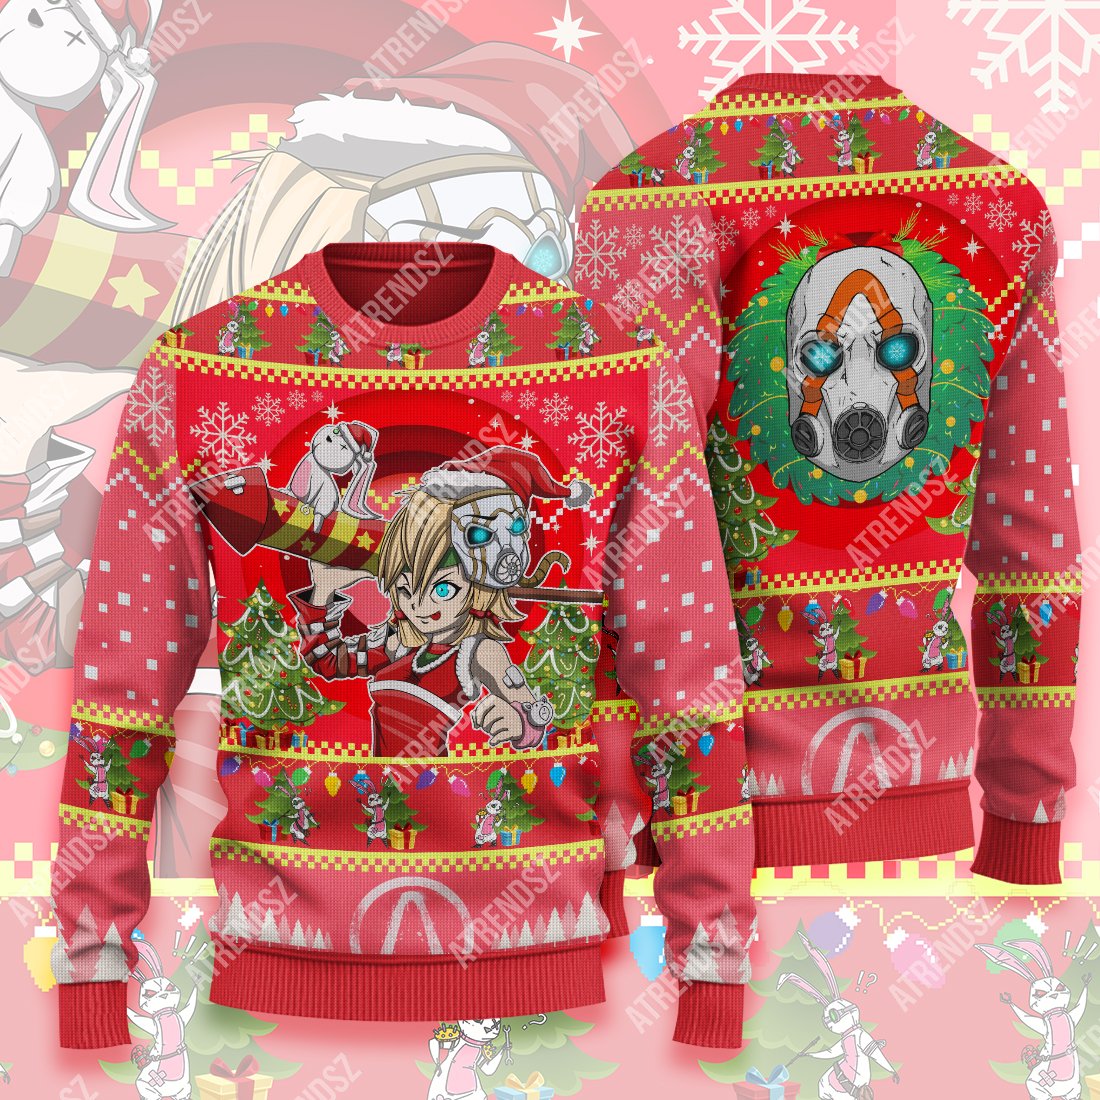 Borderlands Sweater Tina Christmas Ugly Sweater Red Full Print Adult Long Sleeve 4692